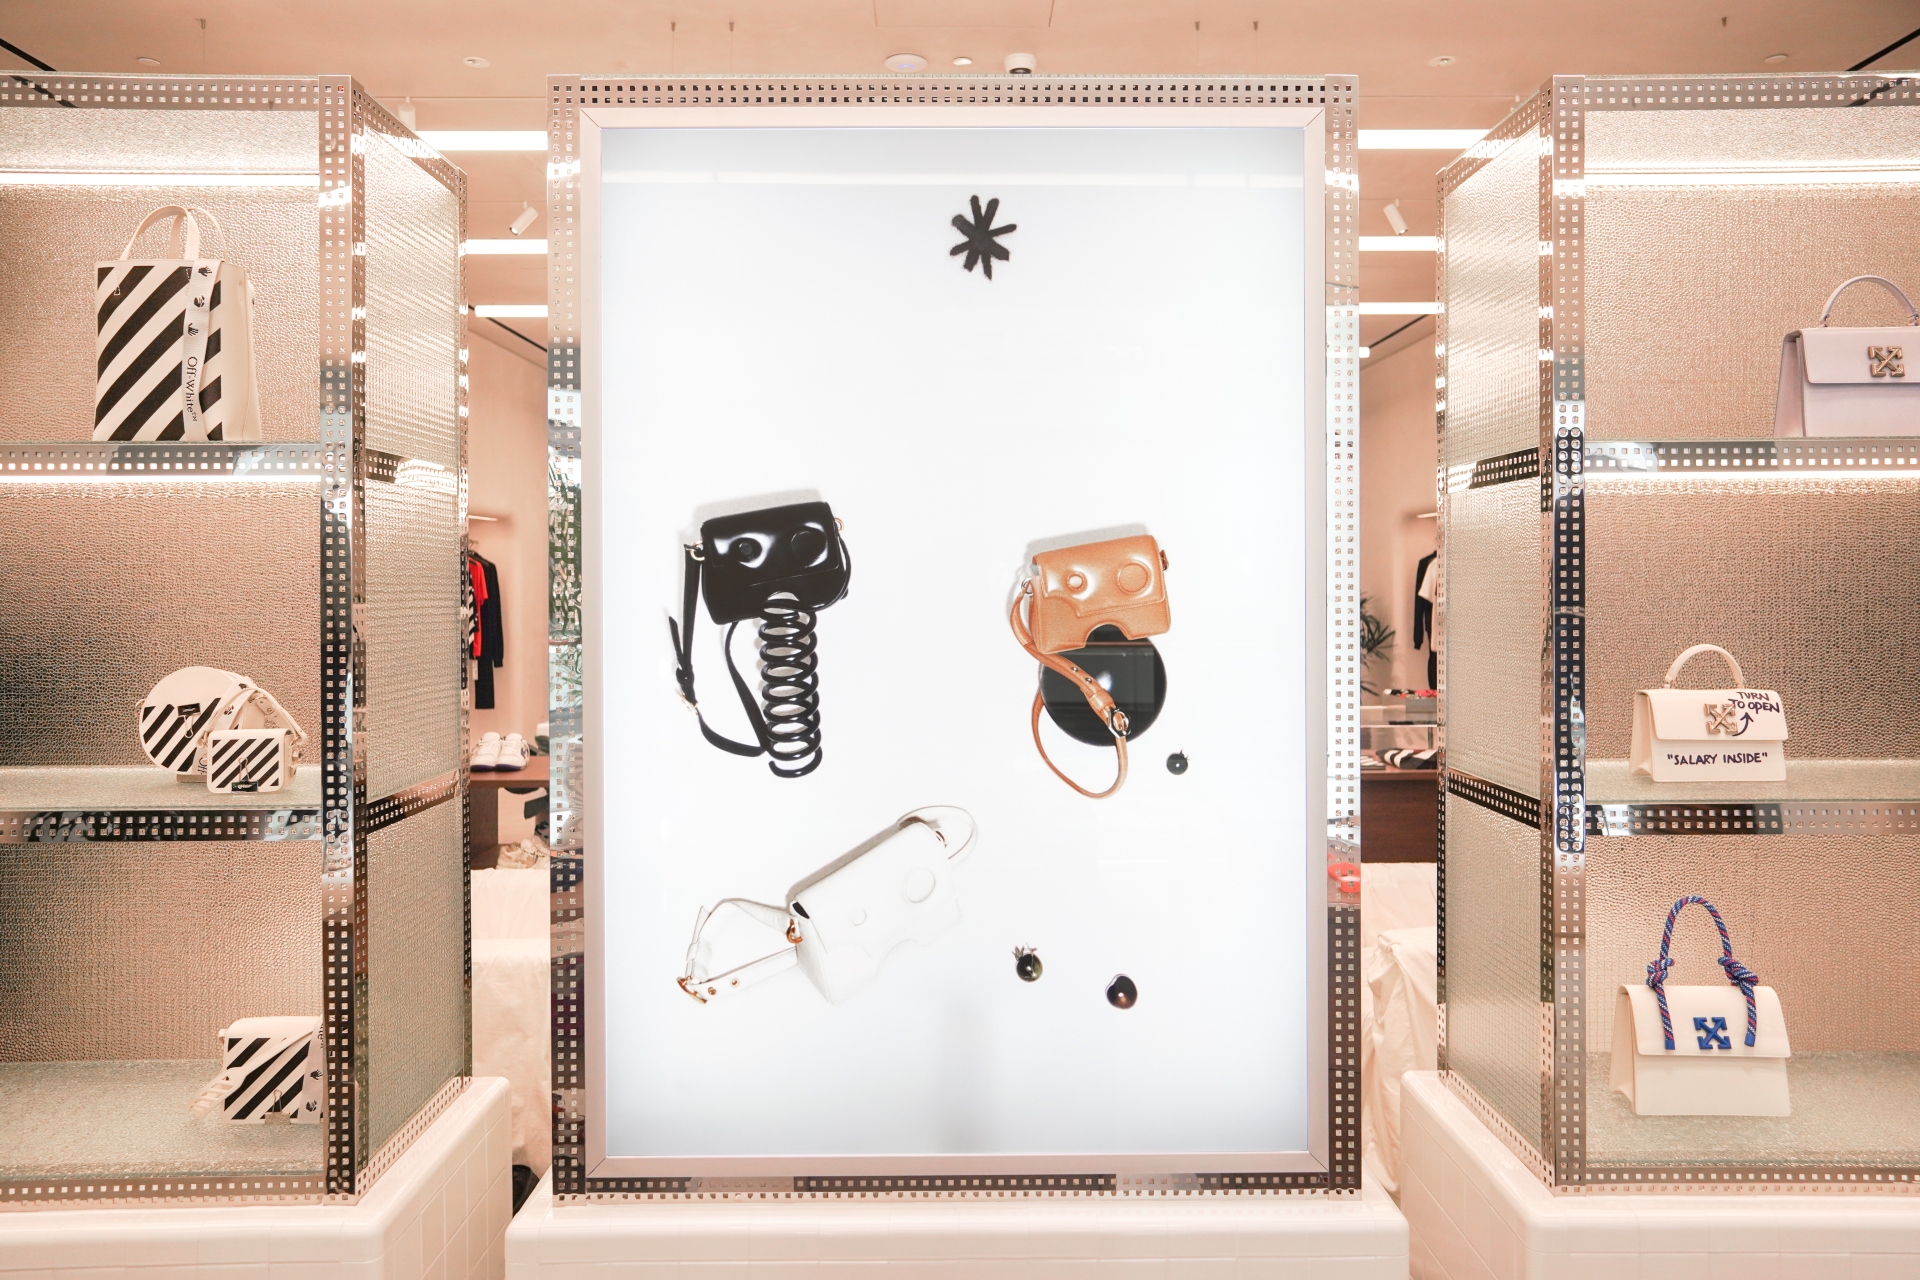 Luxury brand, Off-White, modular approach to the retail experience with white, black, and brown purses on display in store